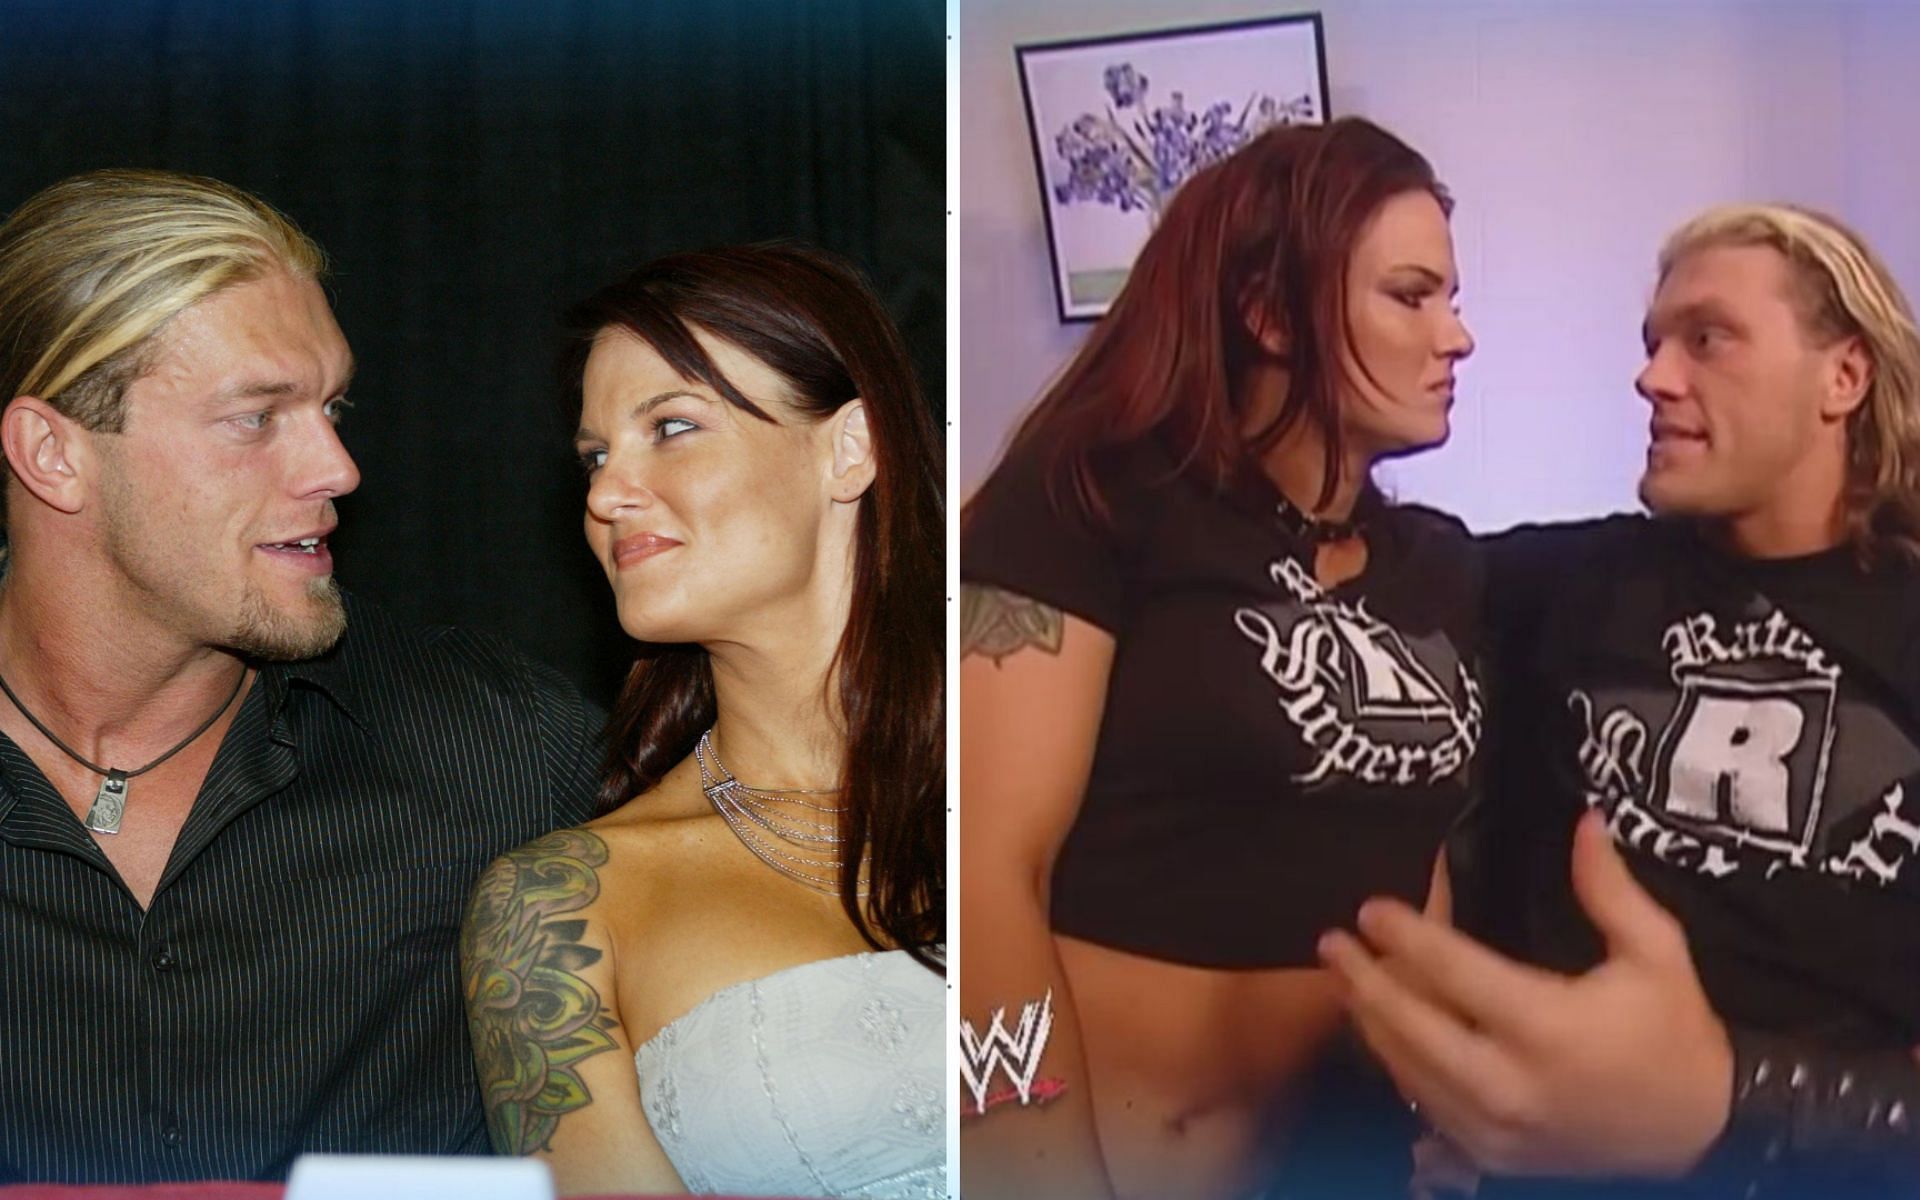 WWE Superstars and former on-screen couple Edge and Lita